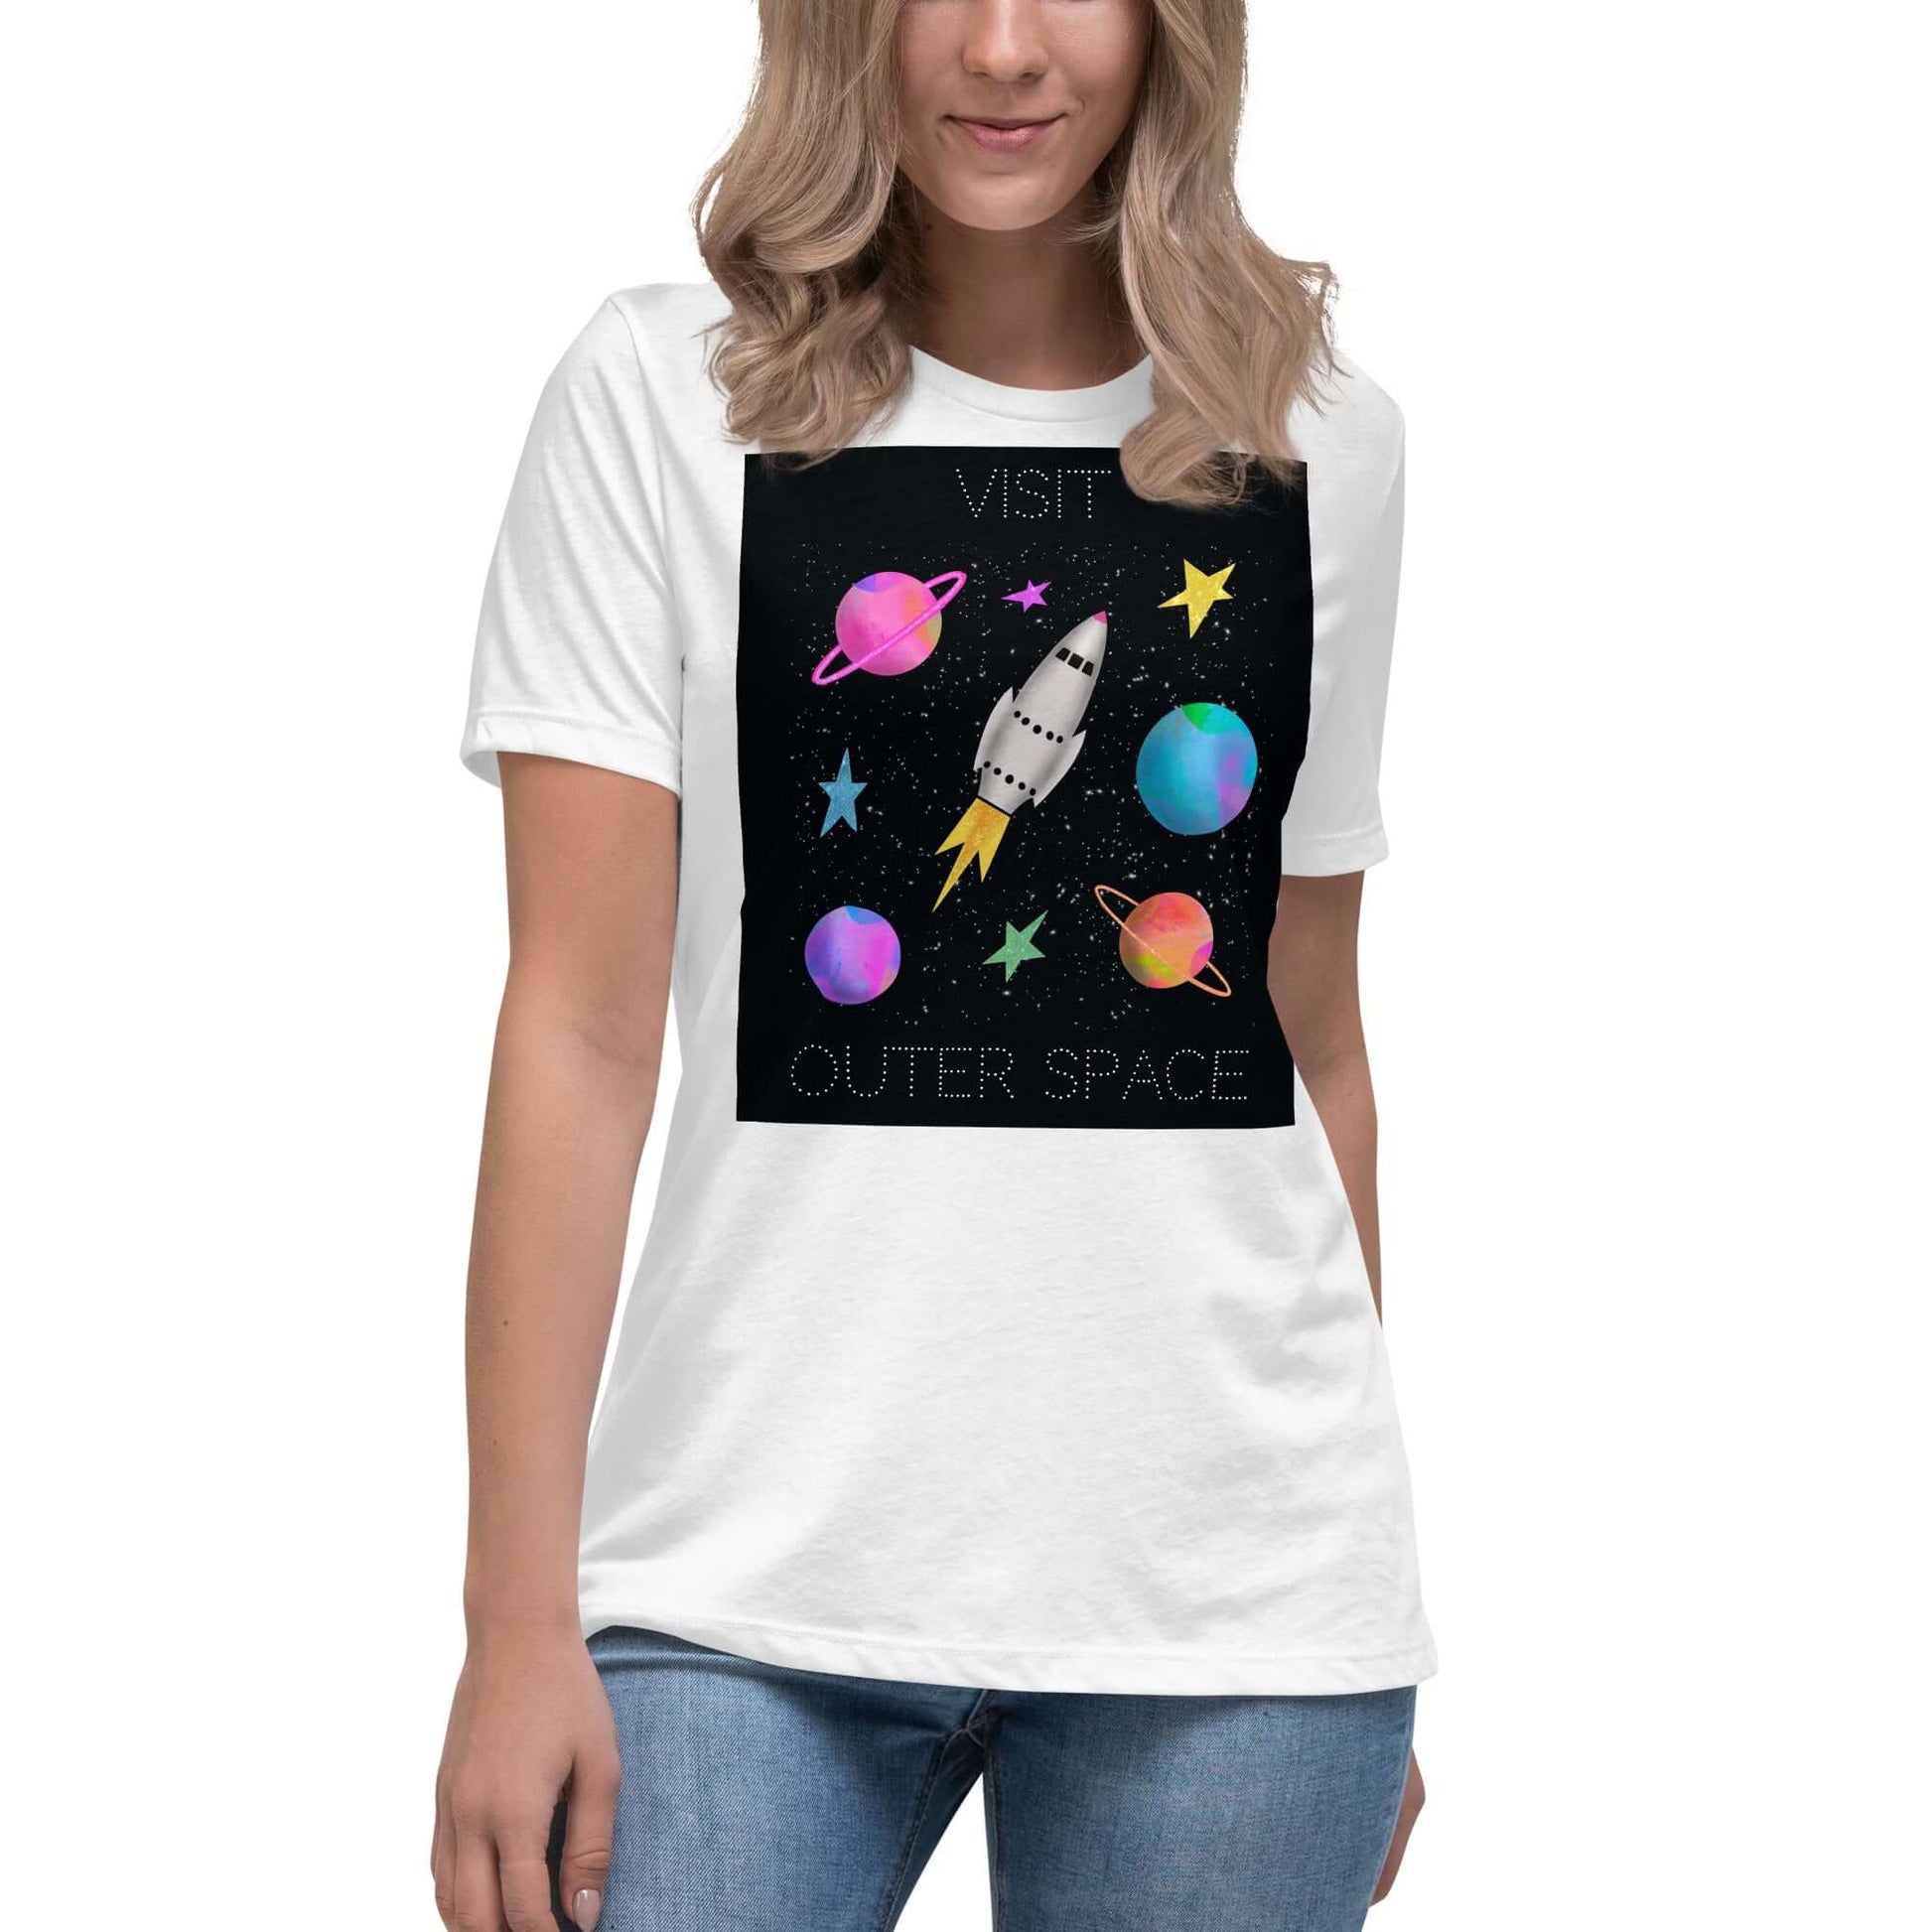 Whimsical Space Rocket with Colorful Planets and Stars on Black Background with Text “Visit Outer Space” Women’s Short Sleeve Tee in White